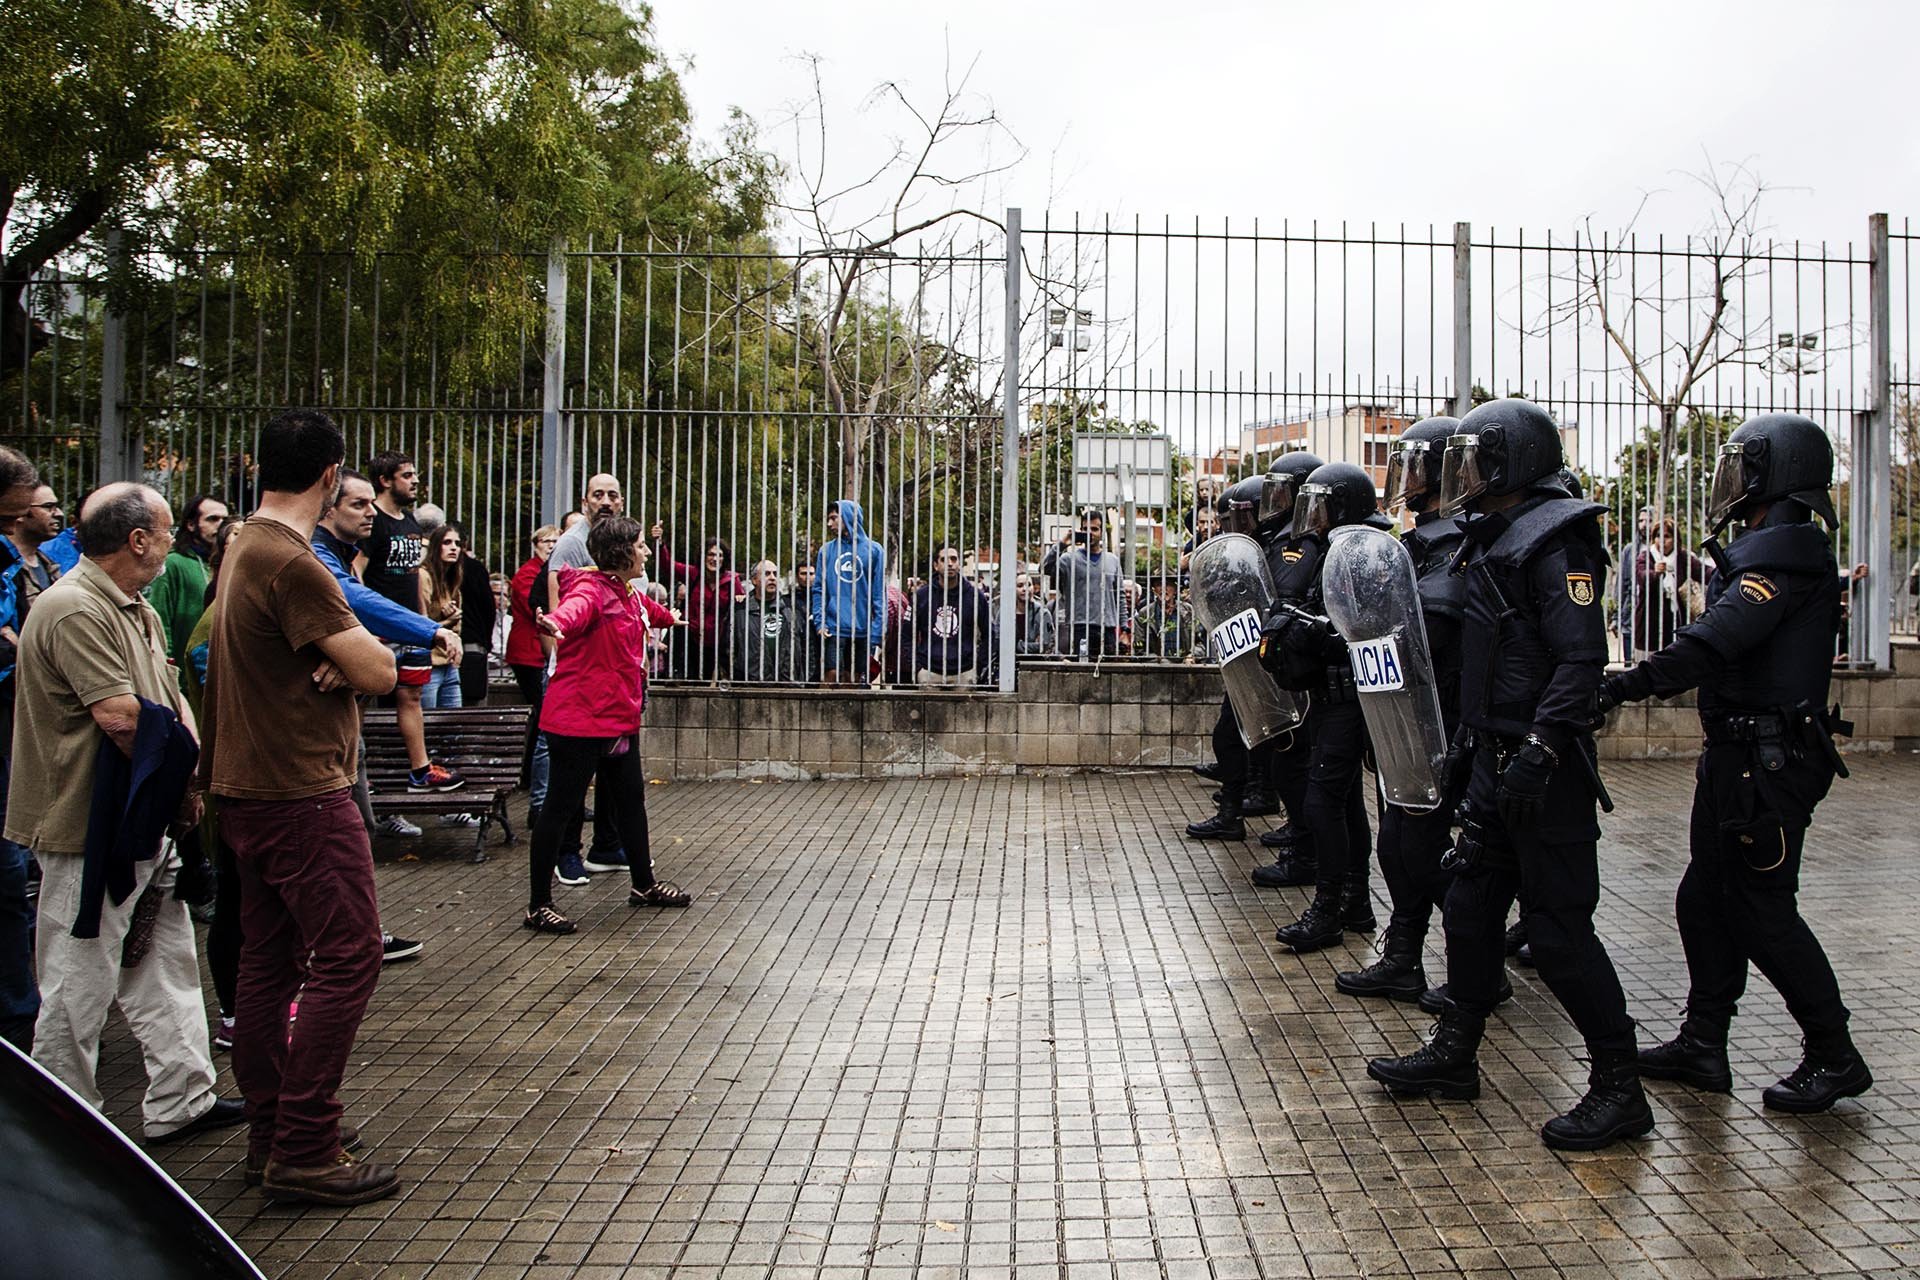 Members of the National Police of the Spanish State are facing citizens who exercise their right to vote during an operation to requisition ballot boxes at a polling station in Barcelona.